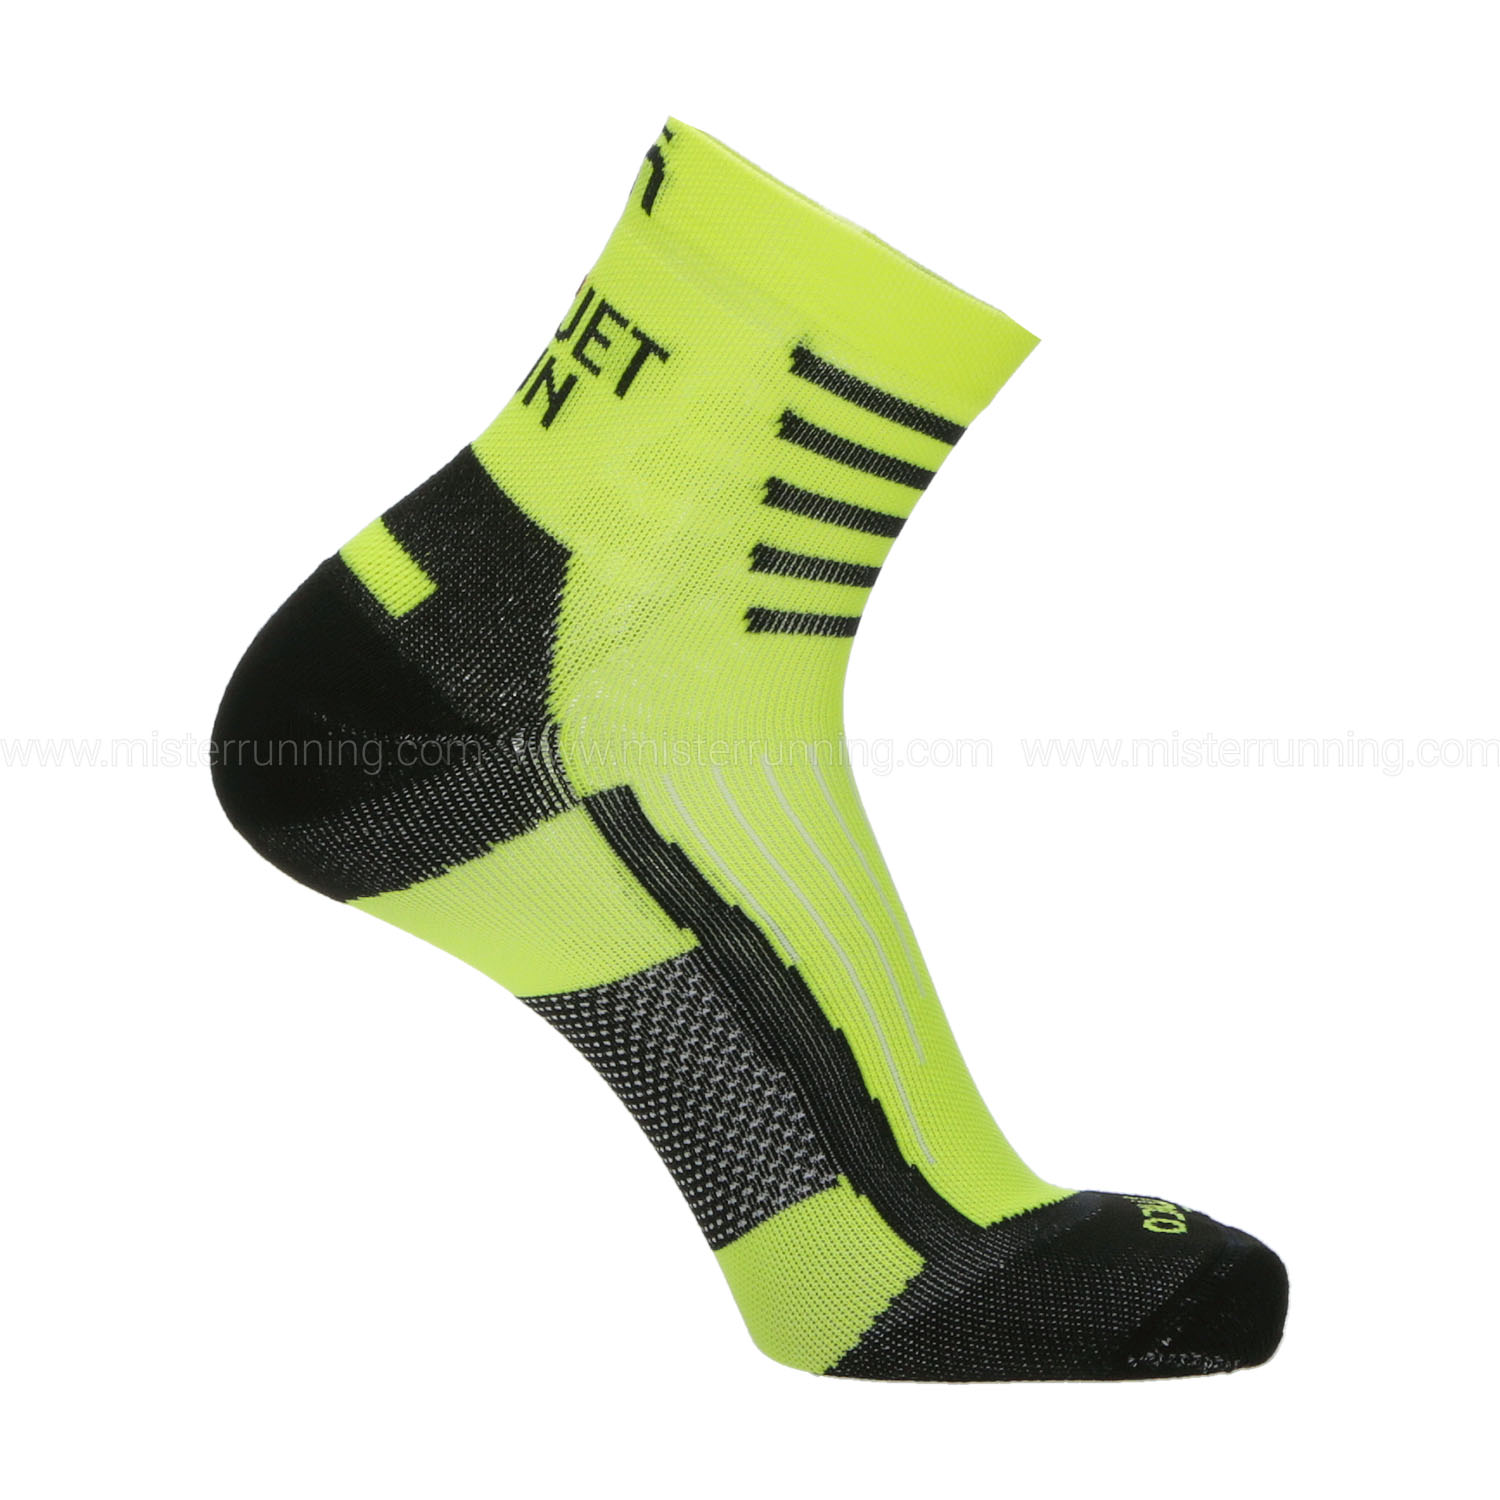 Mico Oxi-jet Light Weight Compression Socks - Giallo Fluo